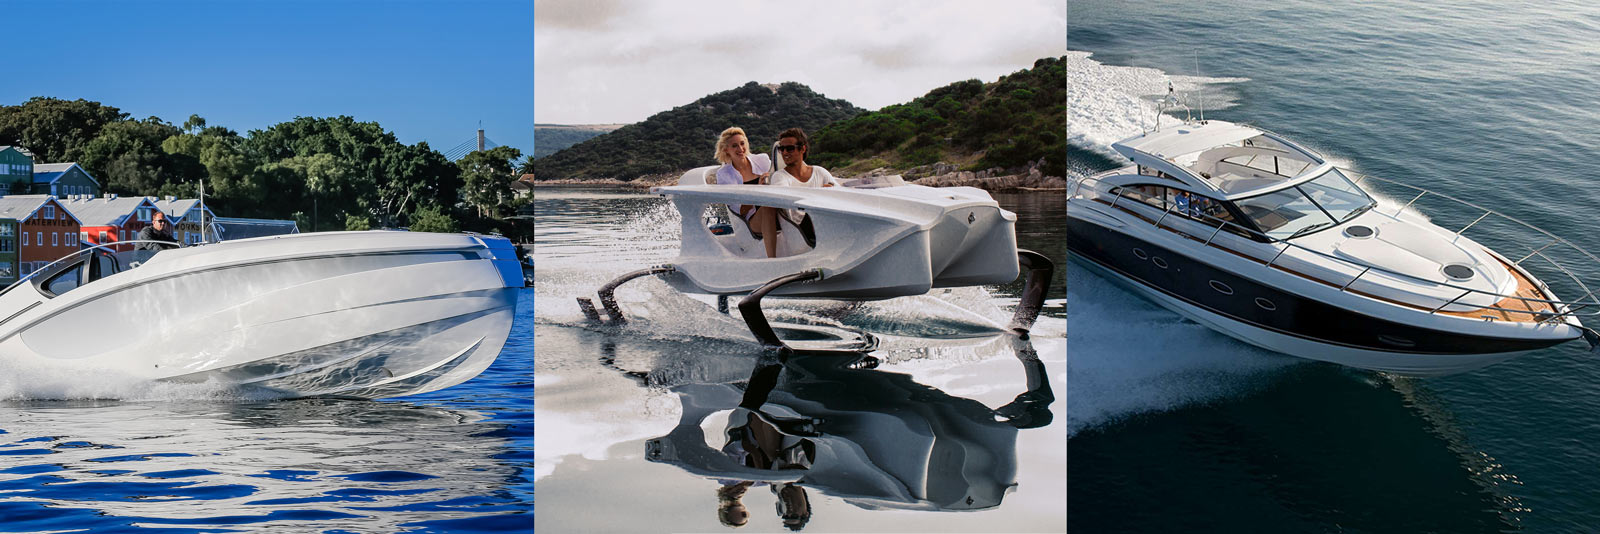 About The Boutique Boat Company